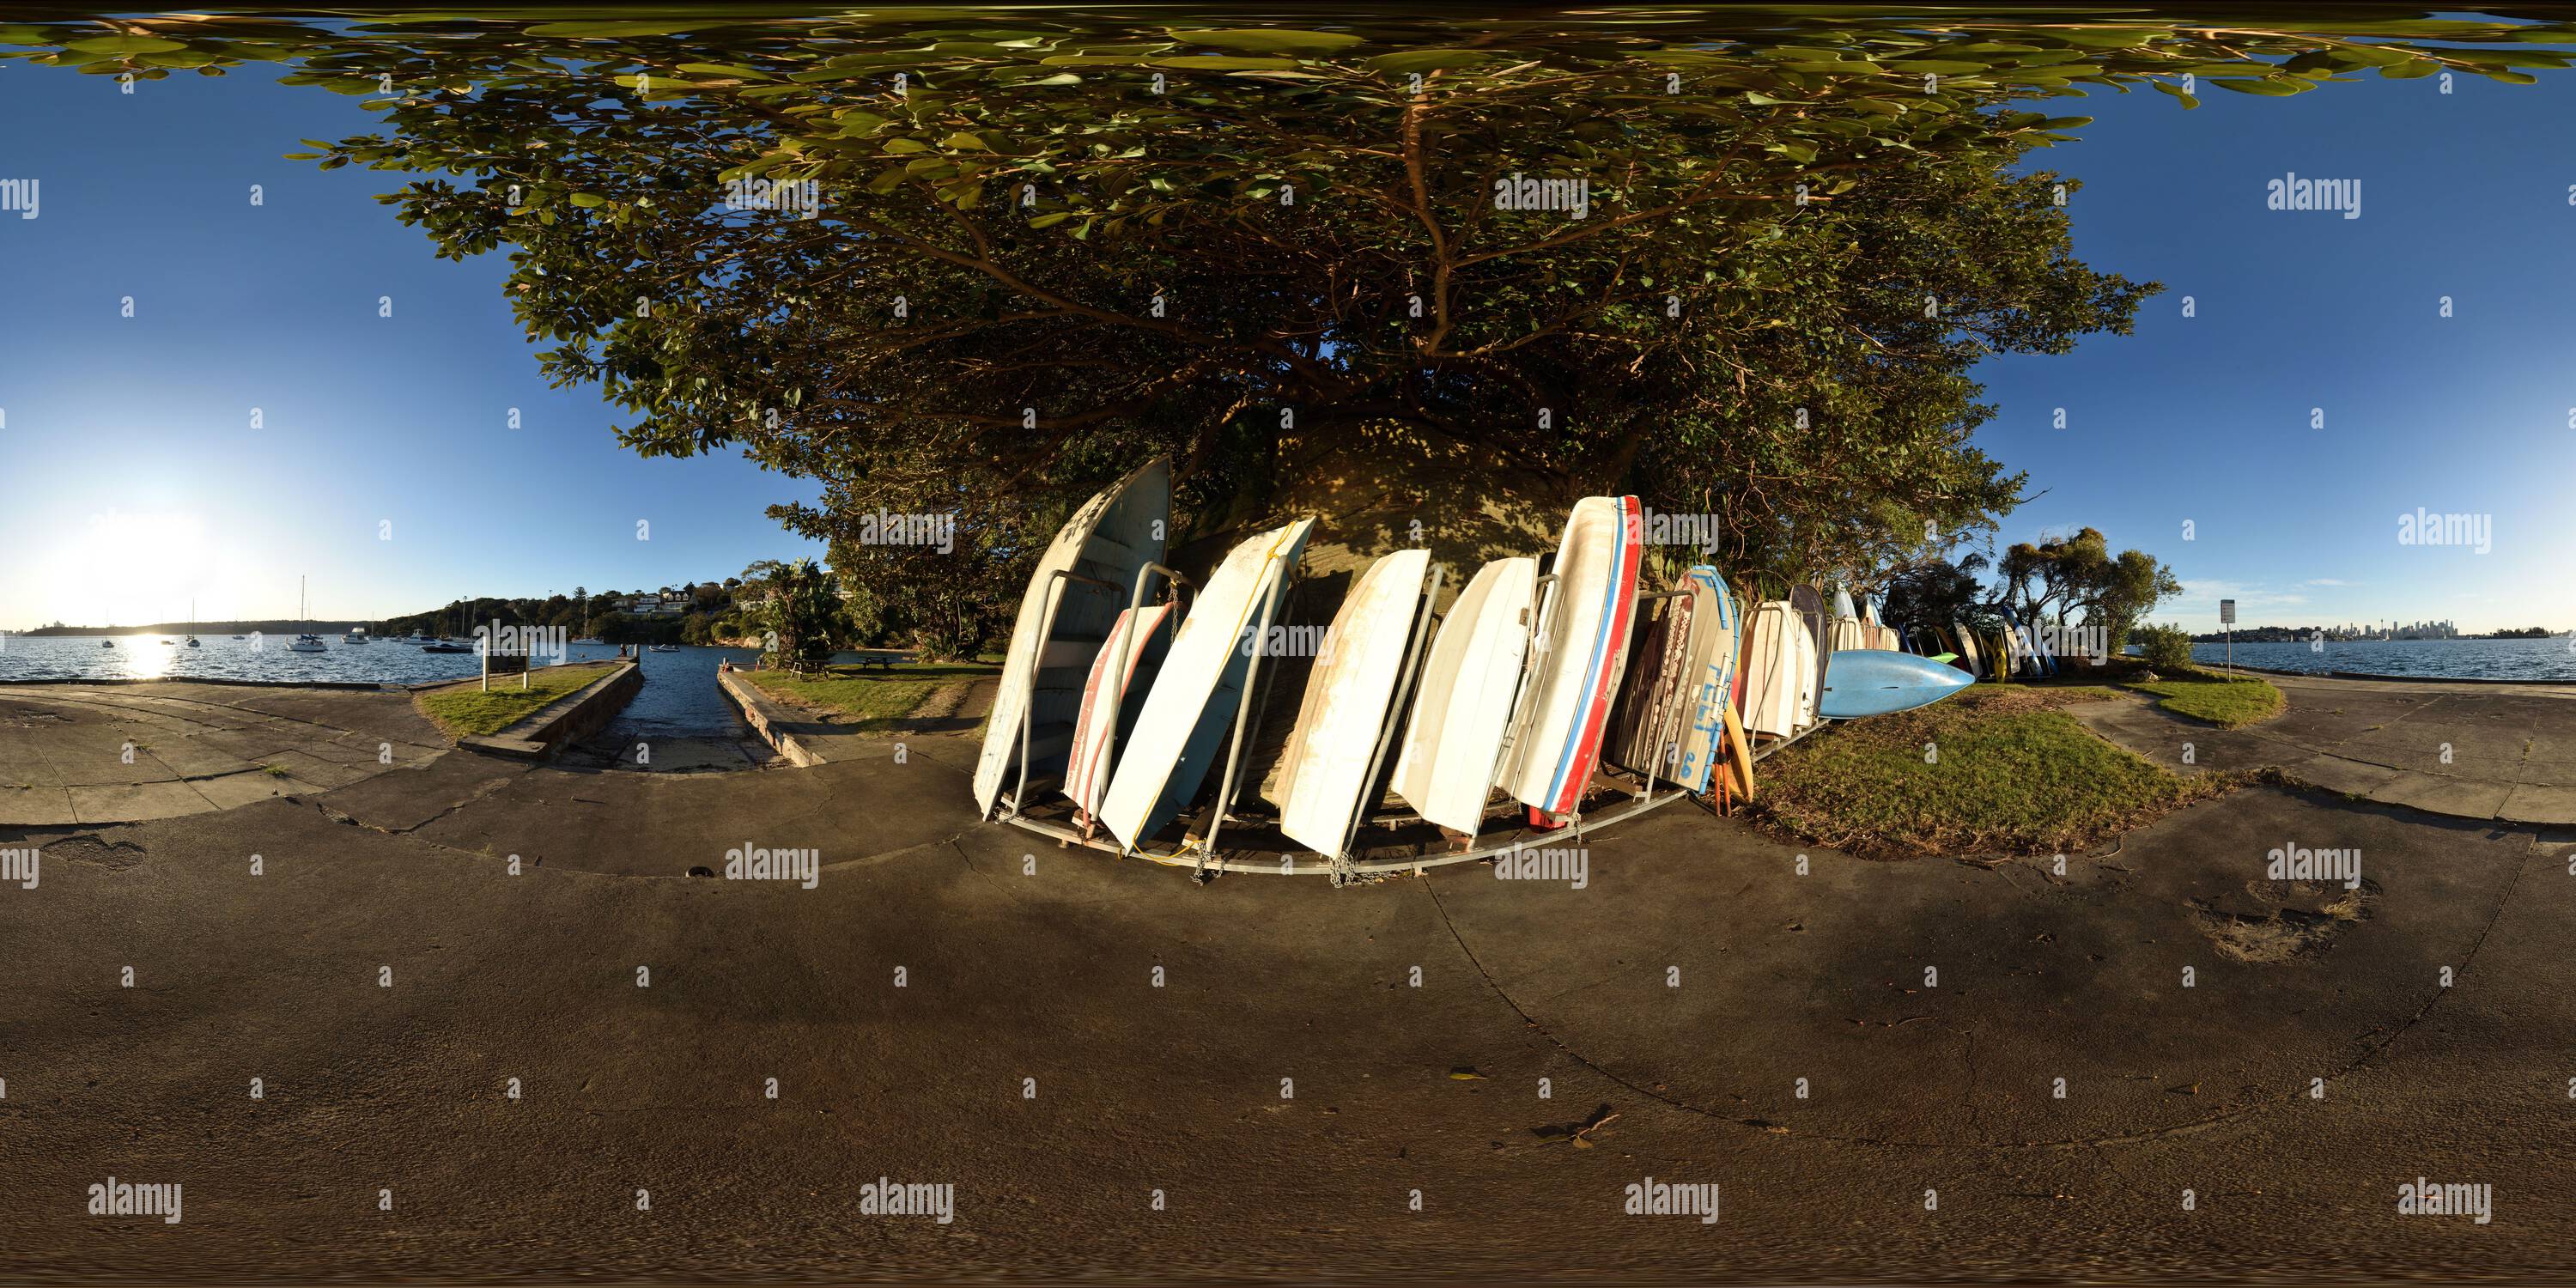 360 degree panoramic view of Rowboats stored in a rack Hermit Bay on in late afternoon sun Hermitage Foreshore Walk, Rose Bay, Sydney, Australia